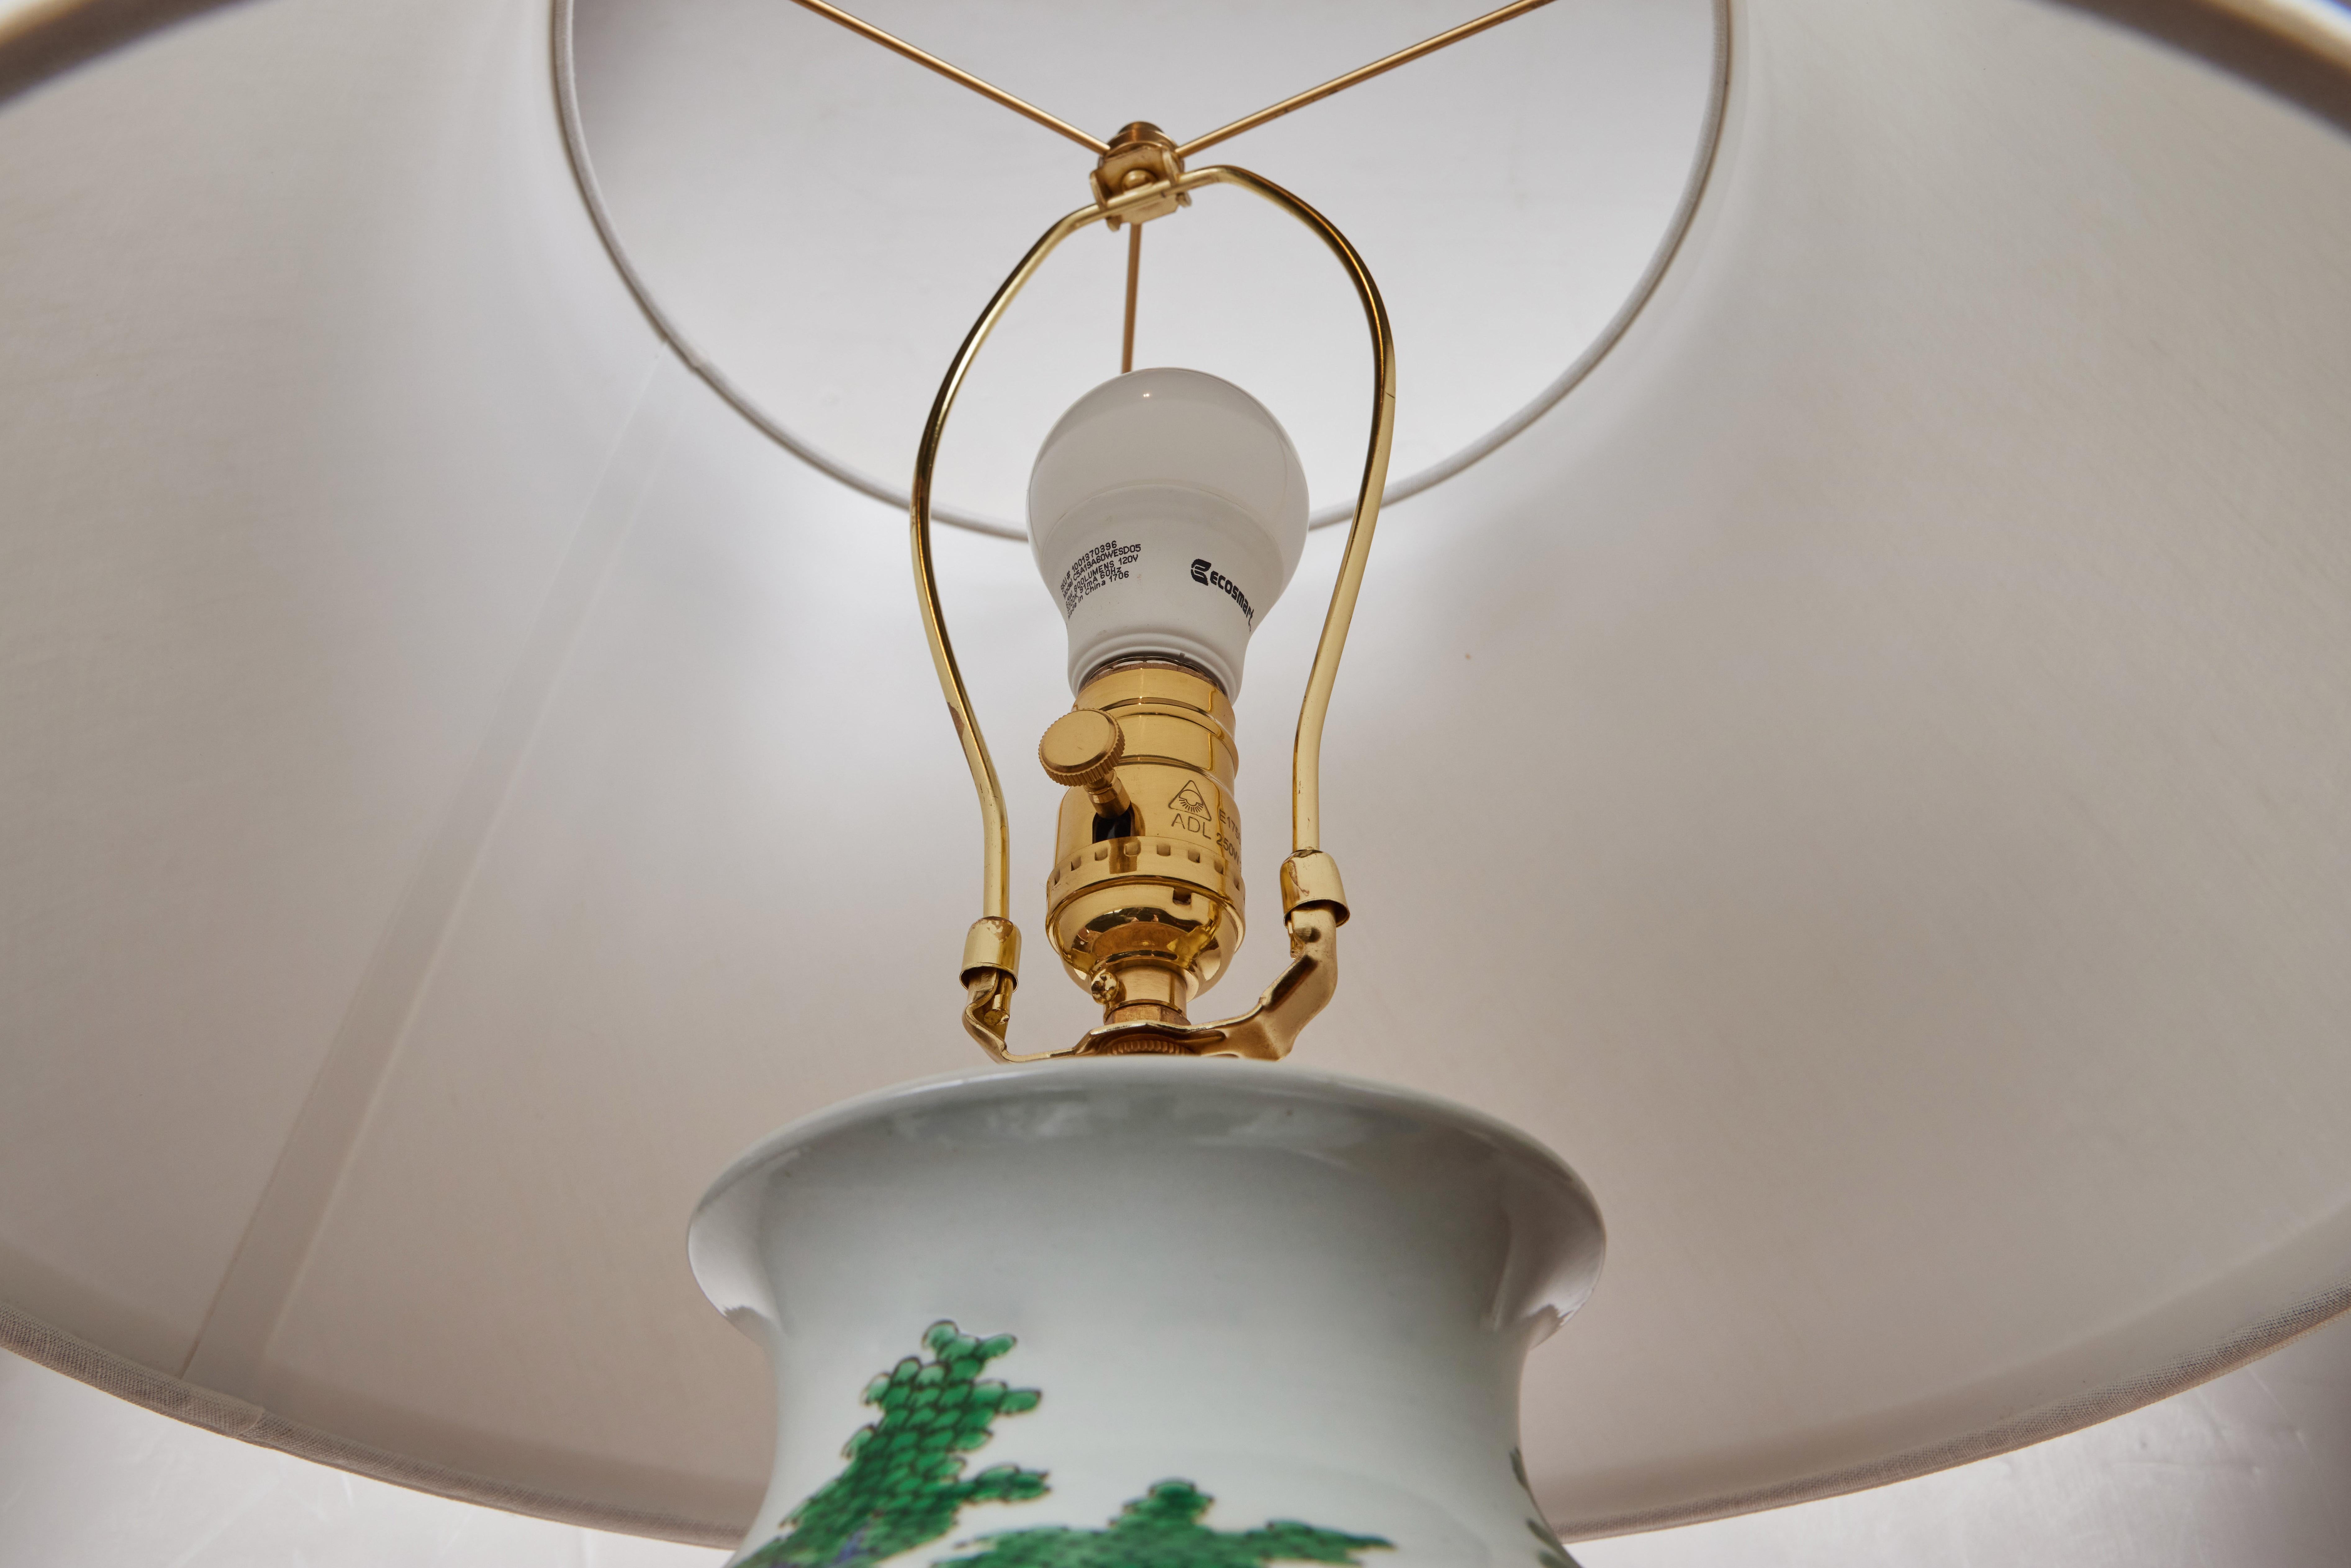 Republic Period, Porcelain Table Lamps In Good Condition For Sale In Newport Beach, CA